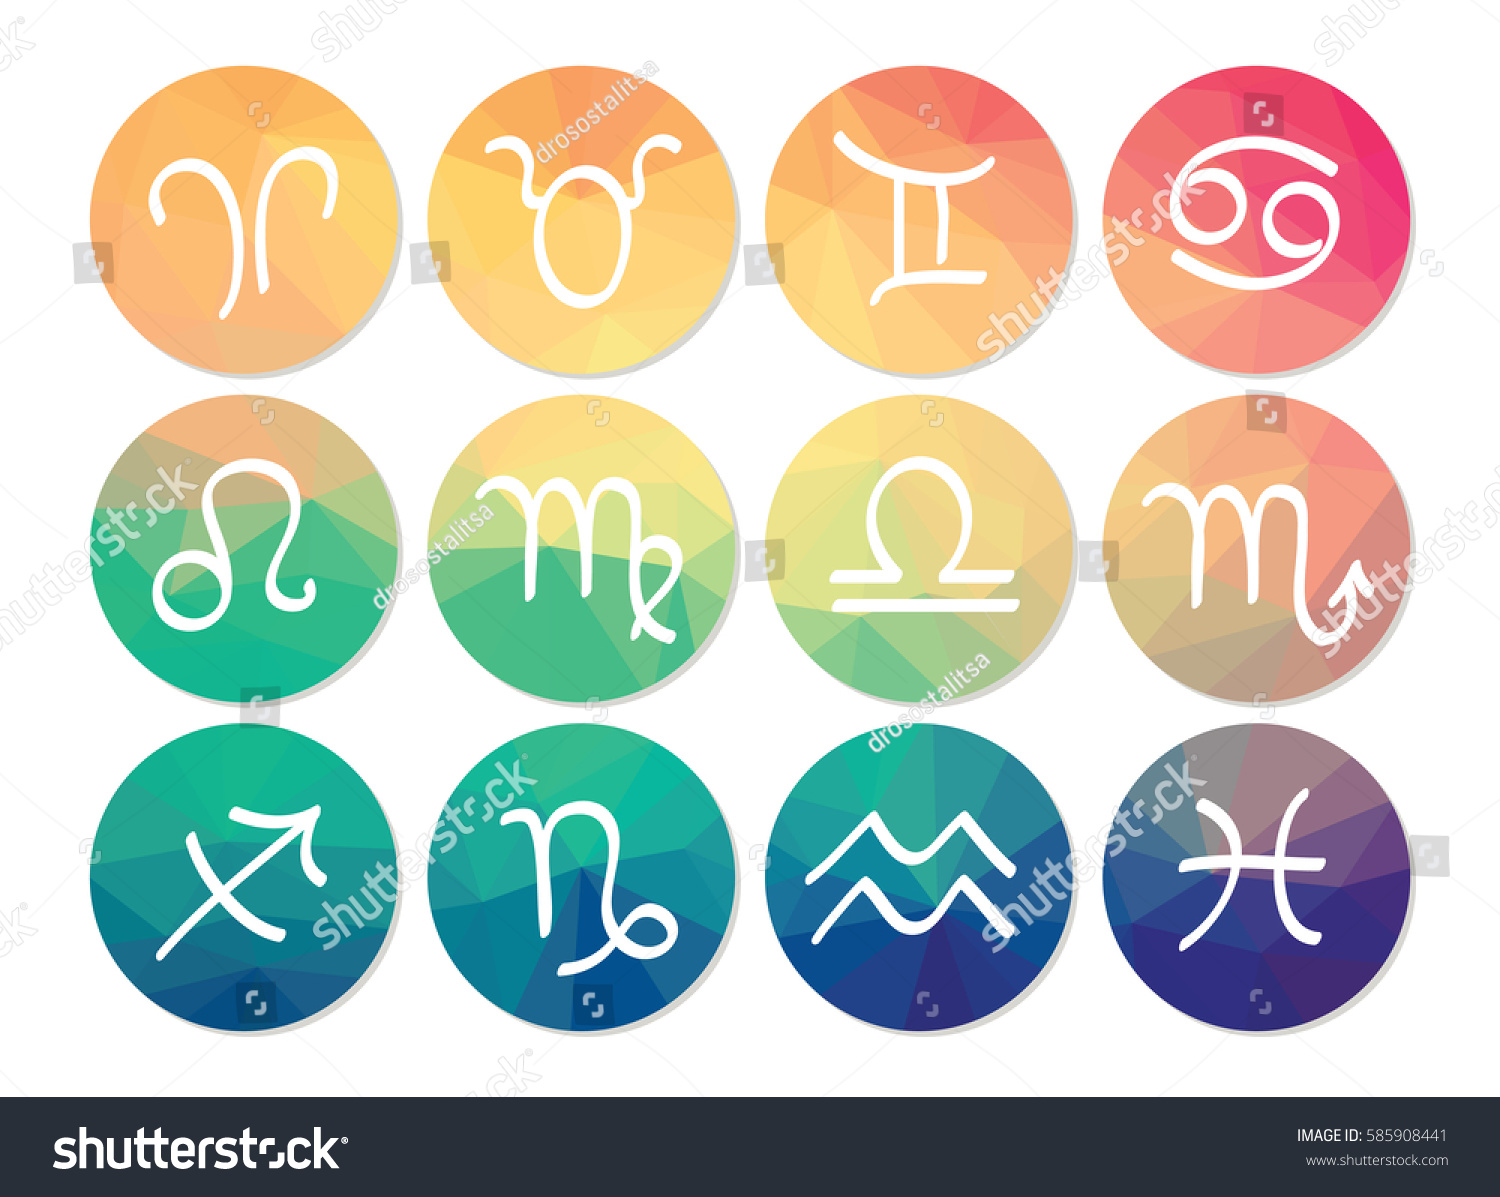 Astrology Symbols Round Rainbow Low Poly Stock Vector (Royalty Free ...